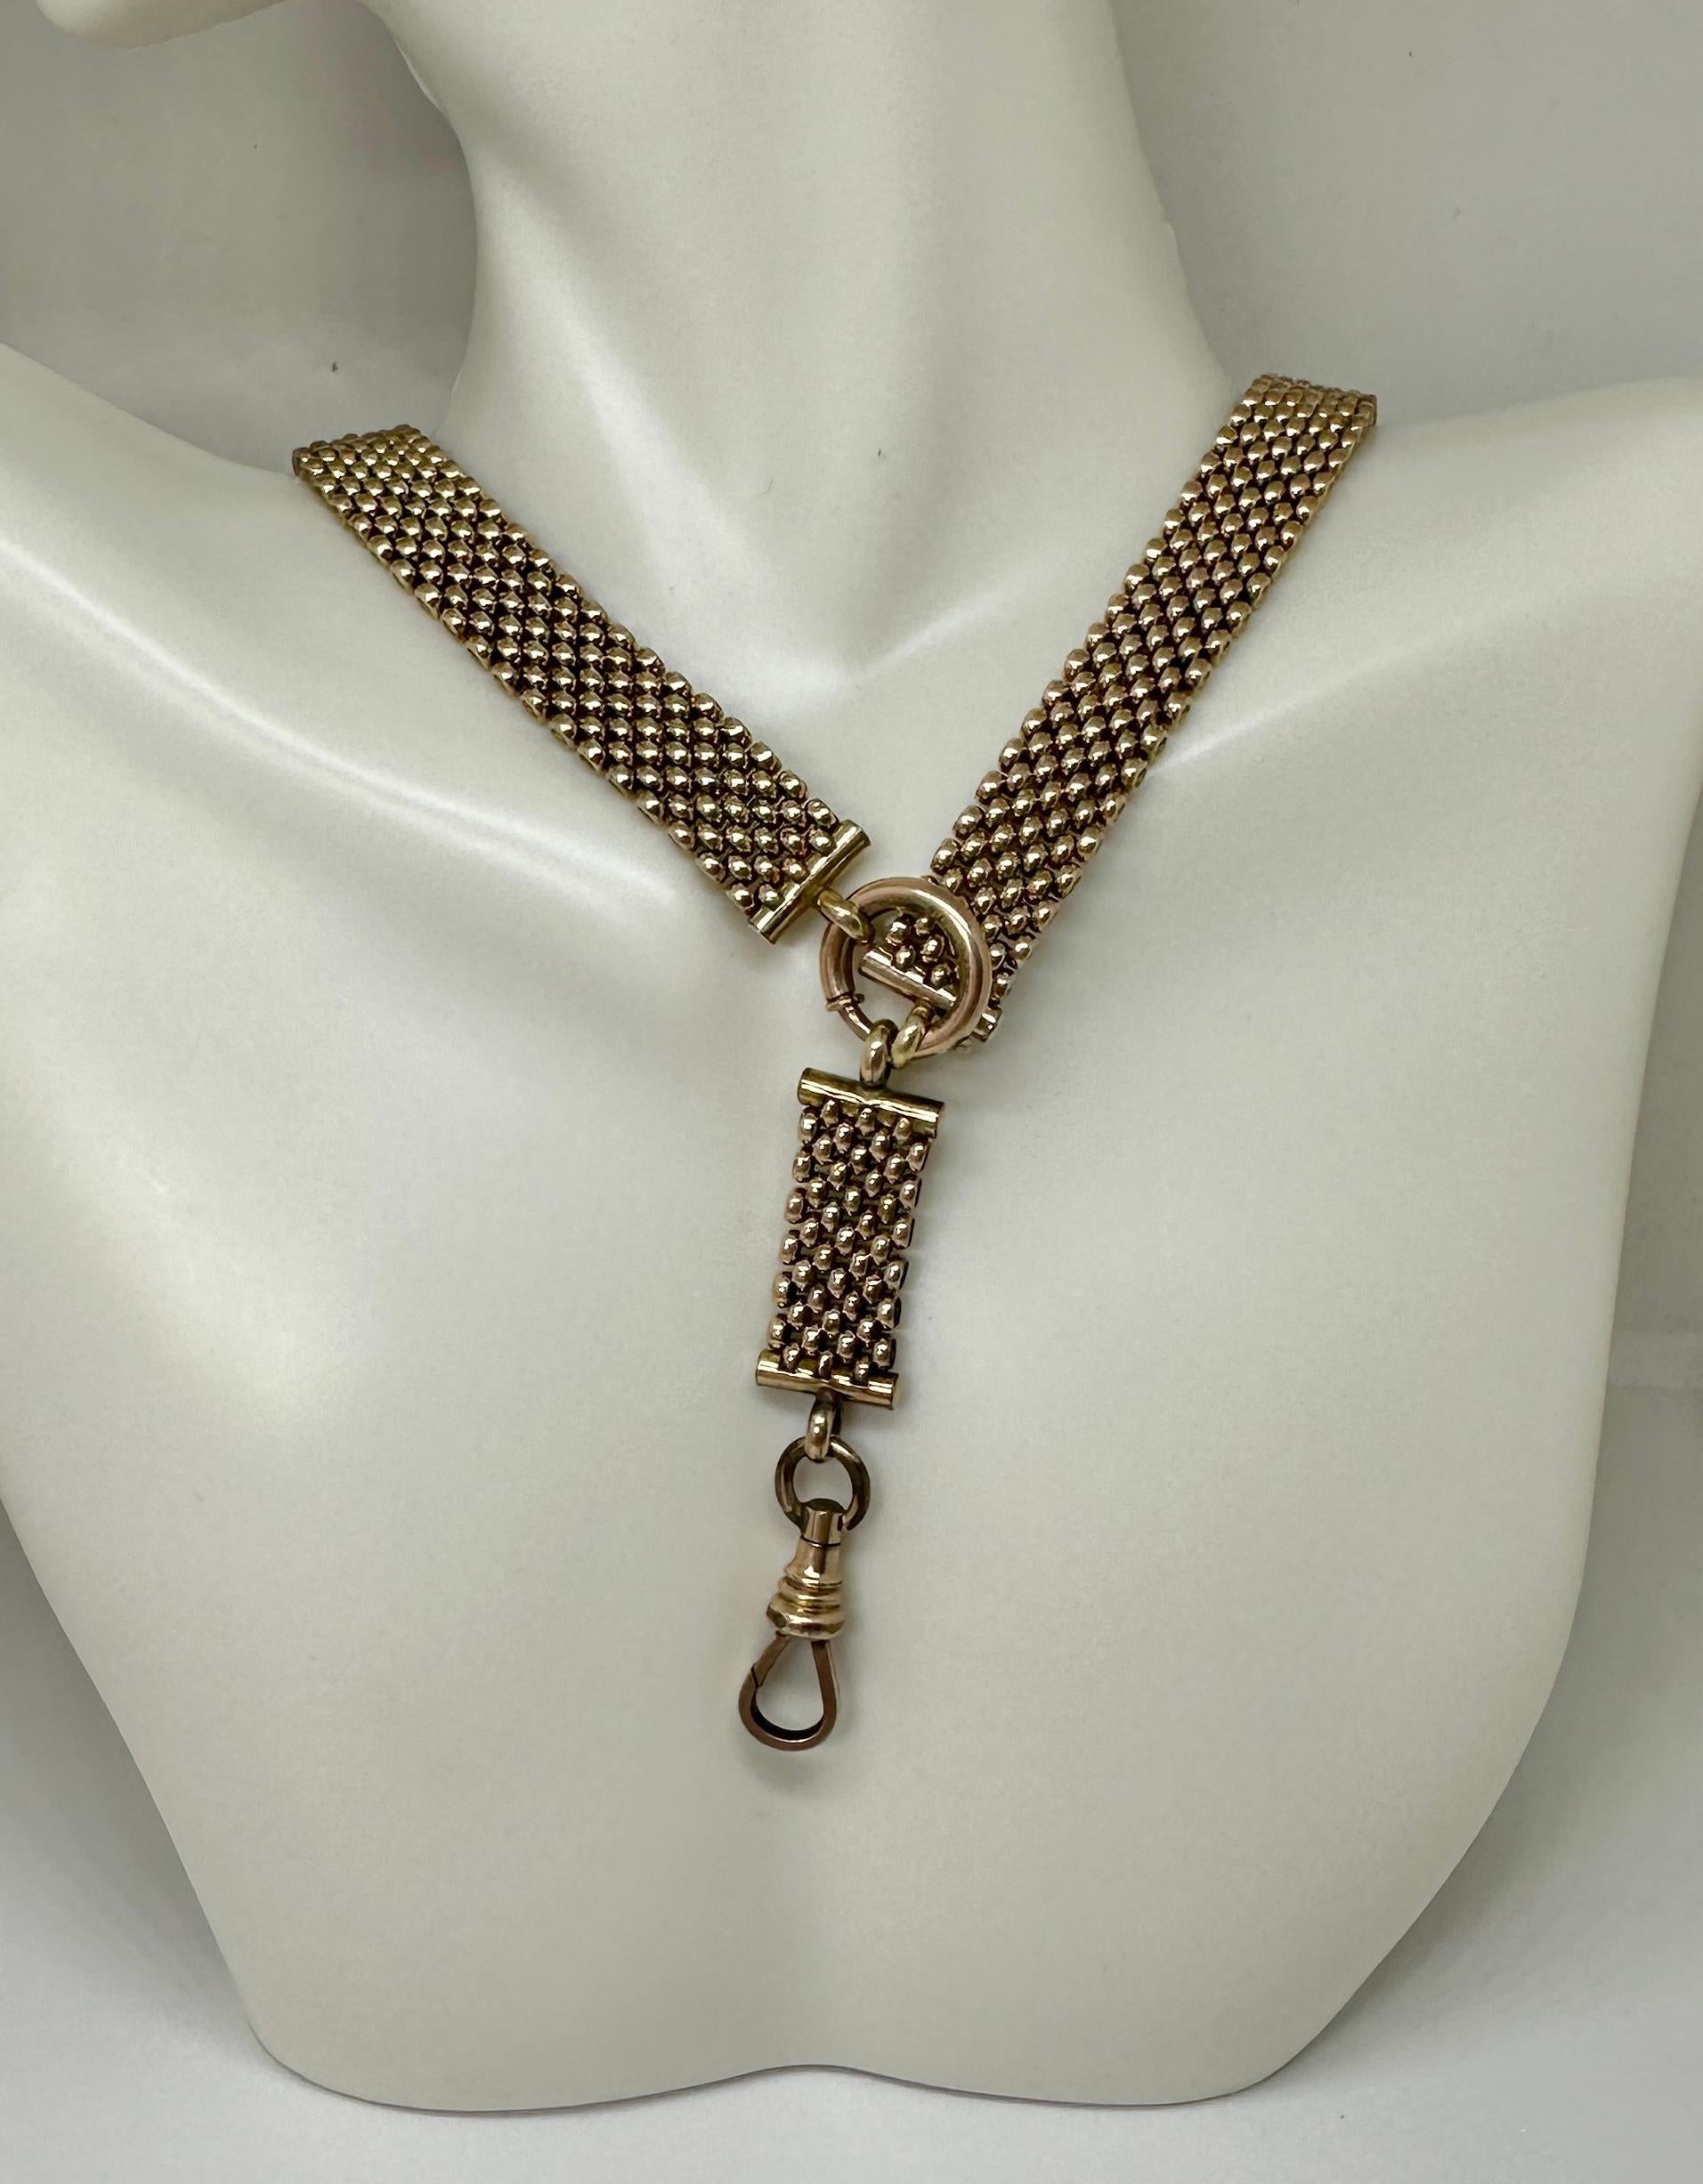 THIS IS A SUPERB ANTIQUE VICTORIAN BOOK BELCHER CHAIN NECKLACE IN A BRAIDED MESH DESIGN WITH TWO FABULOUS BALES INCLUDING A LARGE DOG CLIP BALE AND A LARGE CIRCLE CLIP BALE.  THE NECKLACE IS GOLD FILLED AND DATES TO C1860-1890.  THE NECKLACE IS